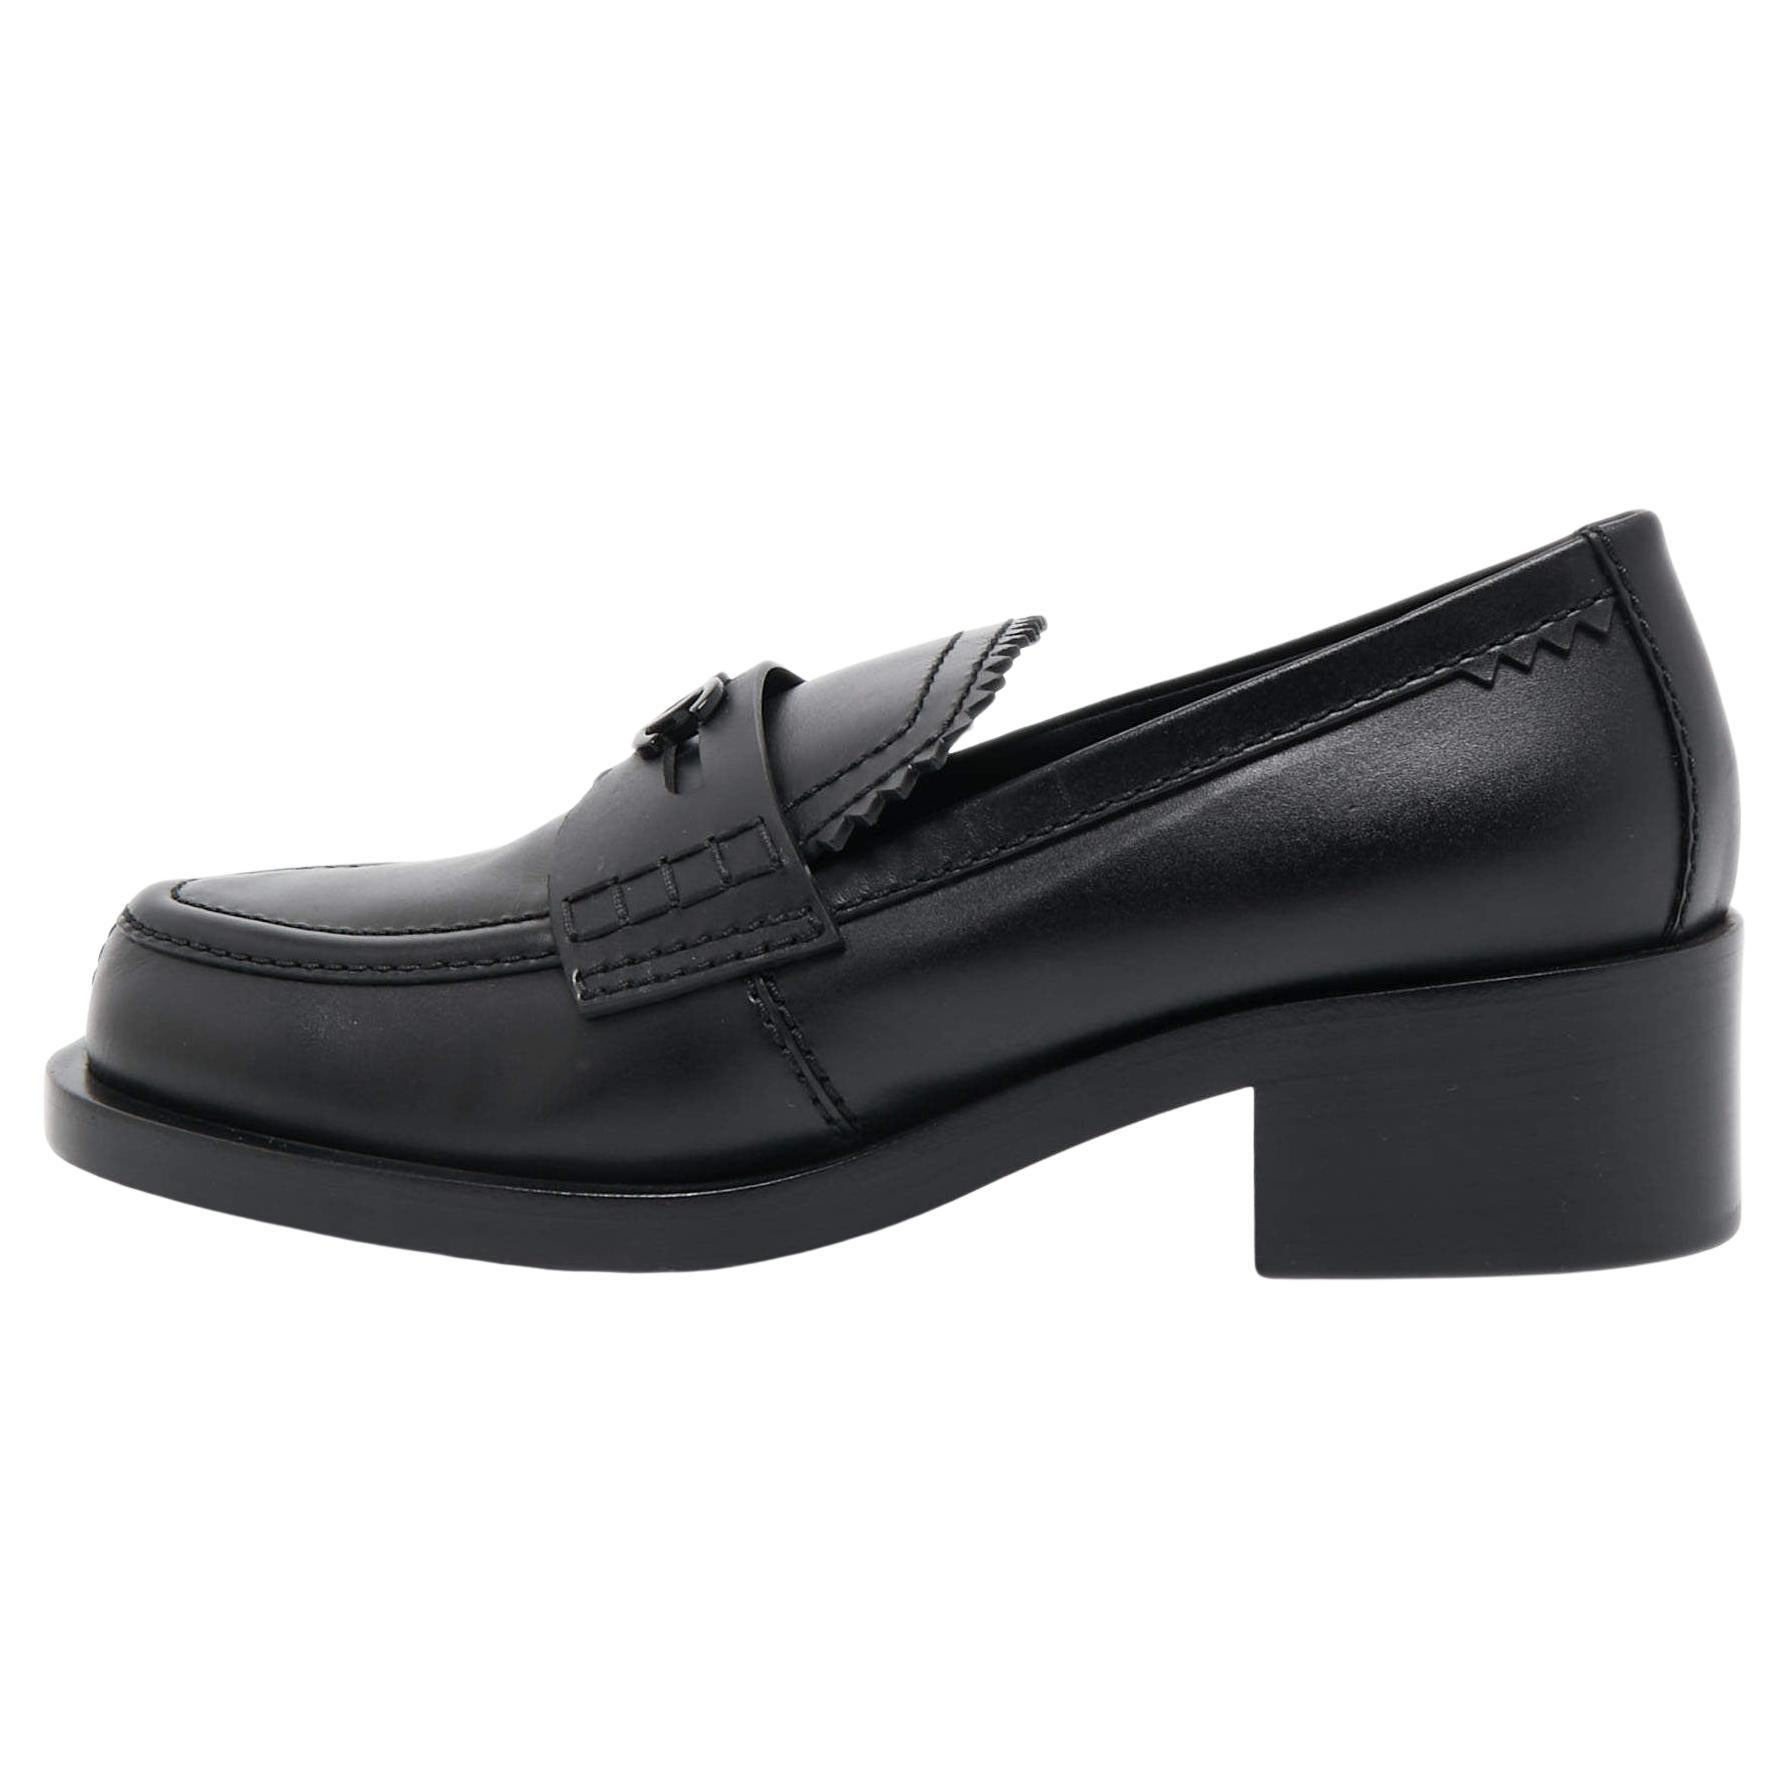 Chanel Black Leather Slip On Loafers Size 38.5